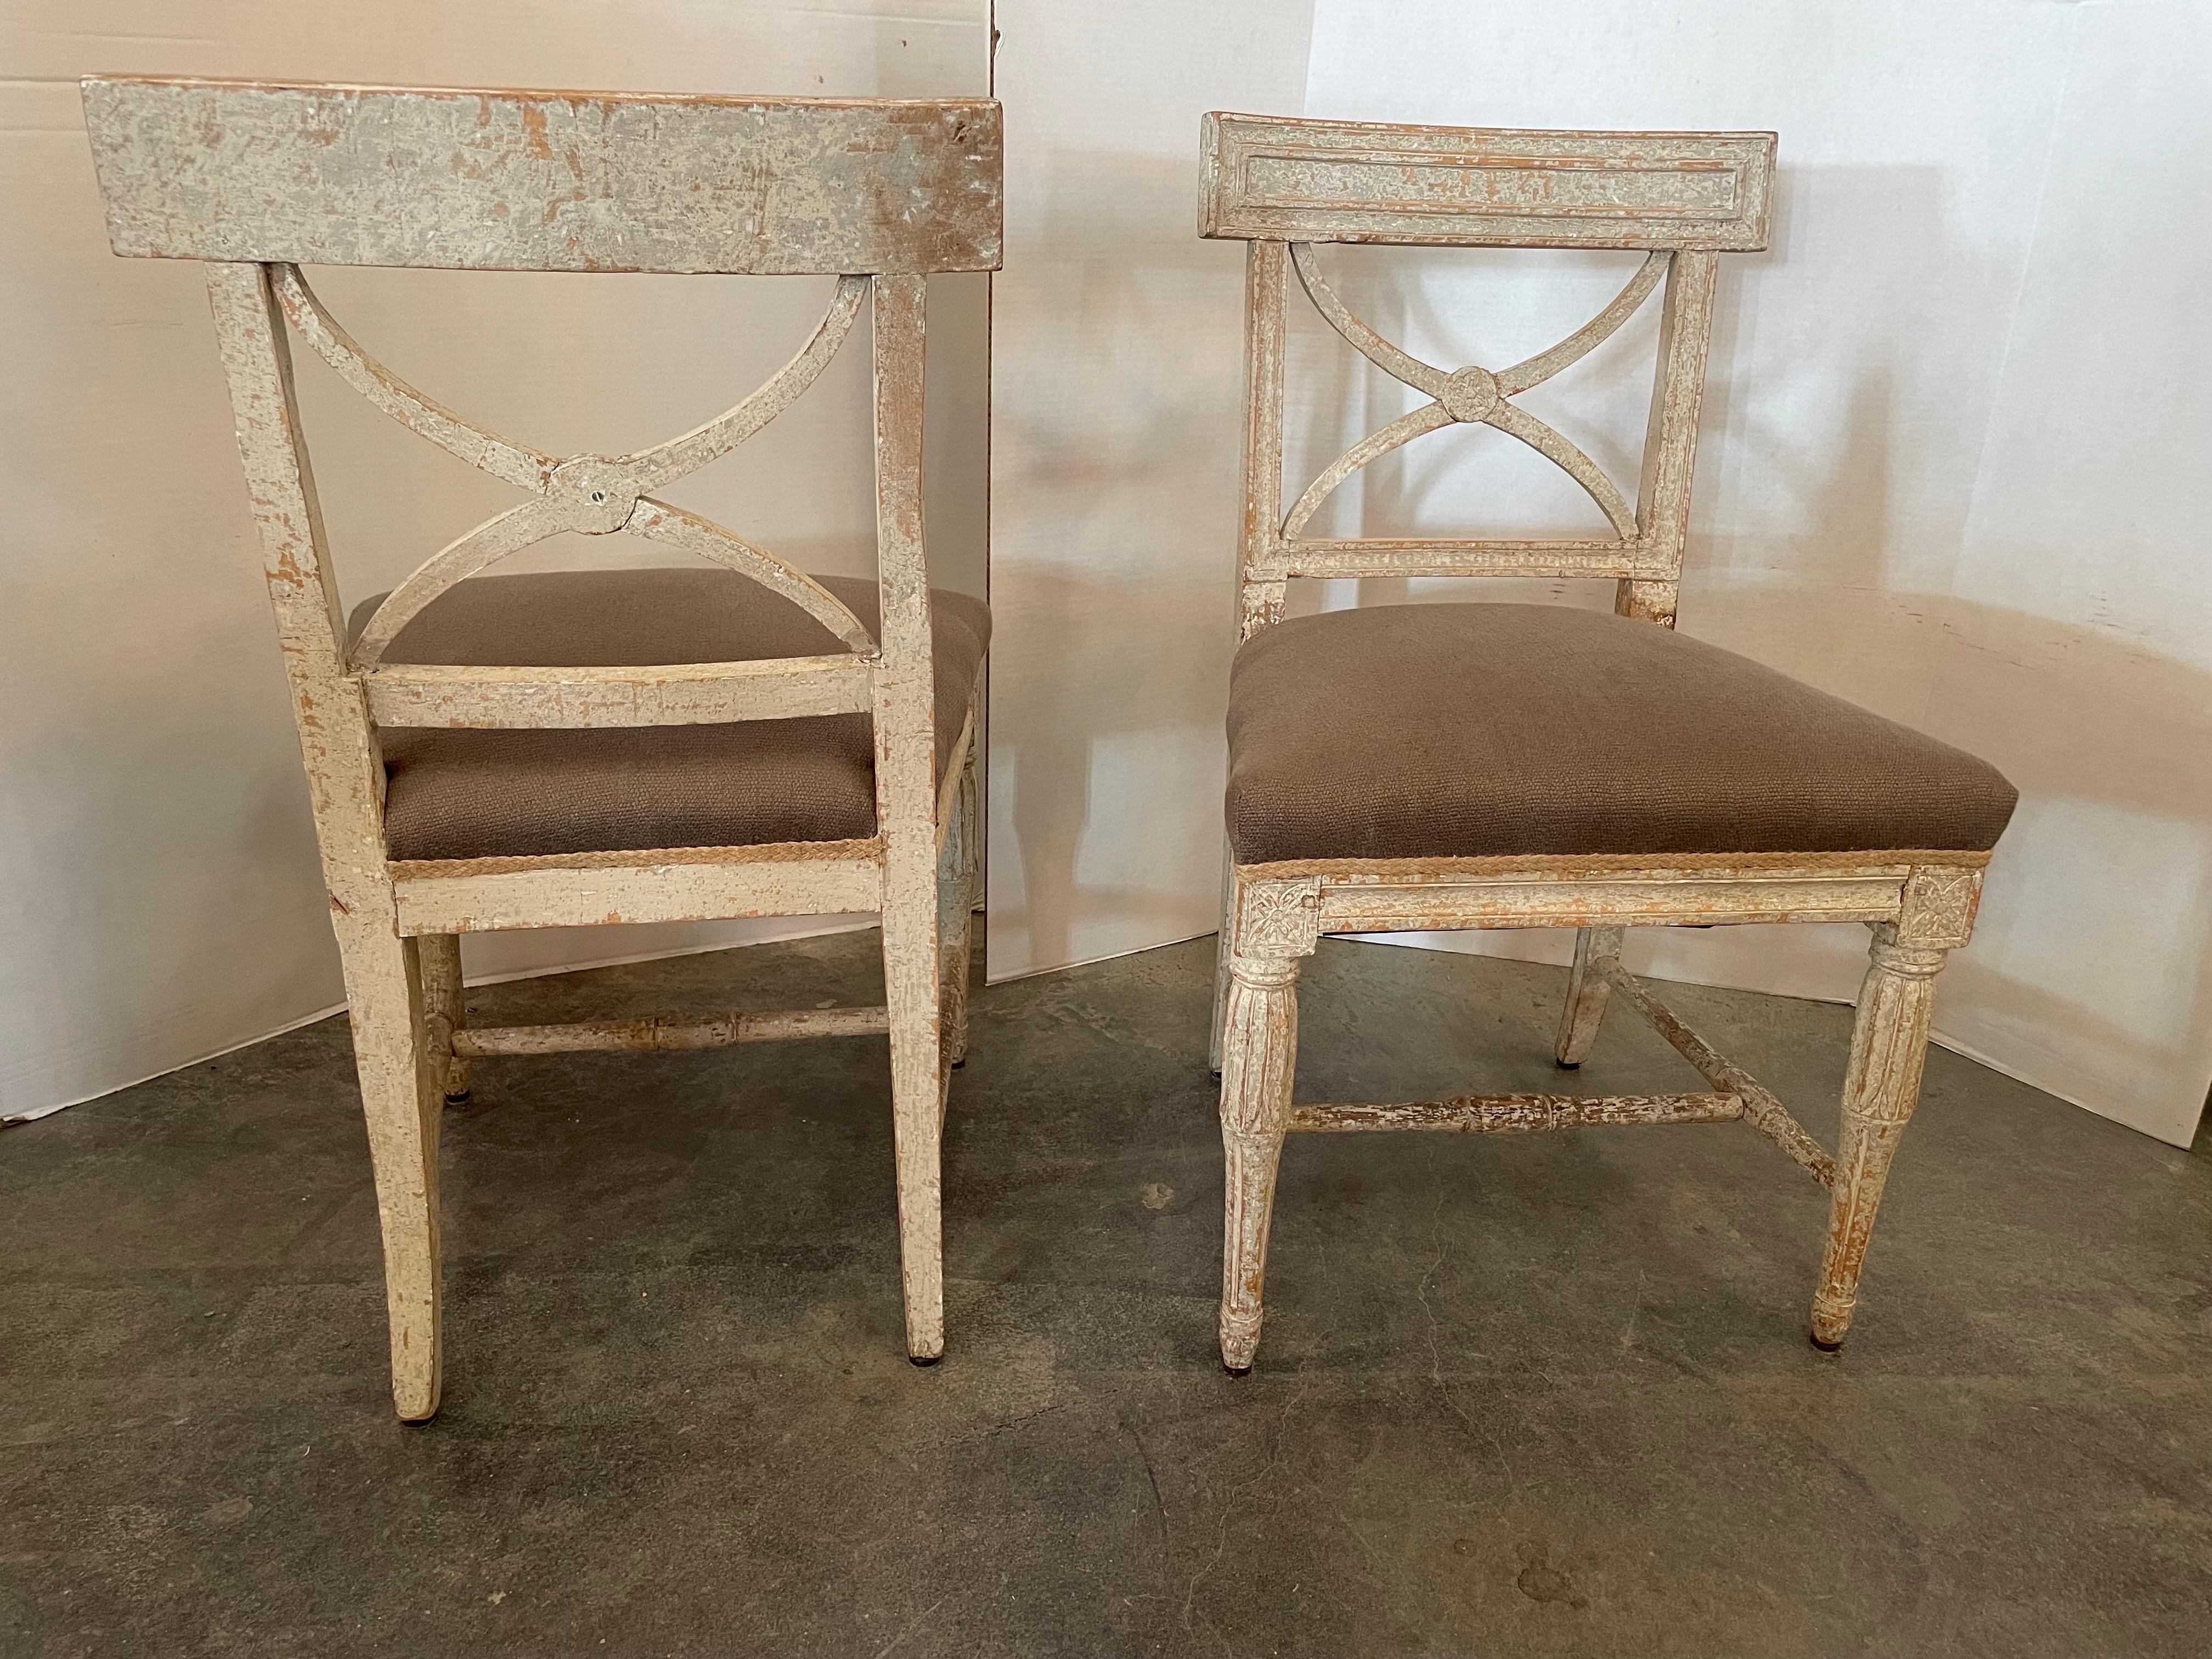 This Gustavian style scraped back painted chairs have a really handsome look with great patina and hints of pale blue plaster paint on creamy white.
They make a beautiful set around a casual table. They’re very solid and sturdy with subtle carvings